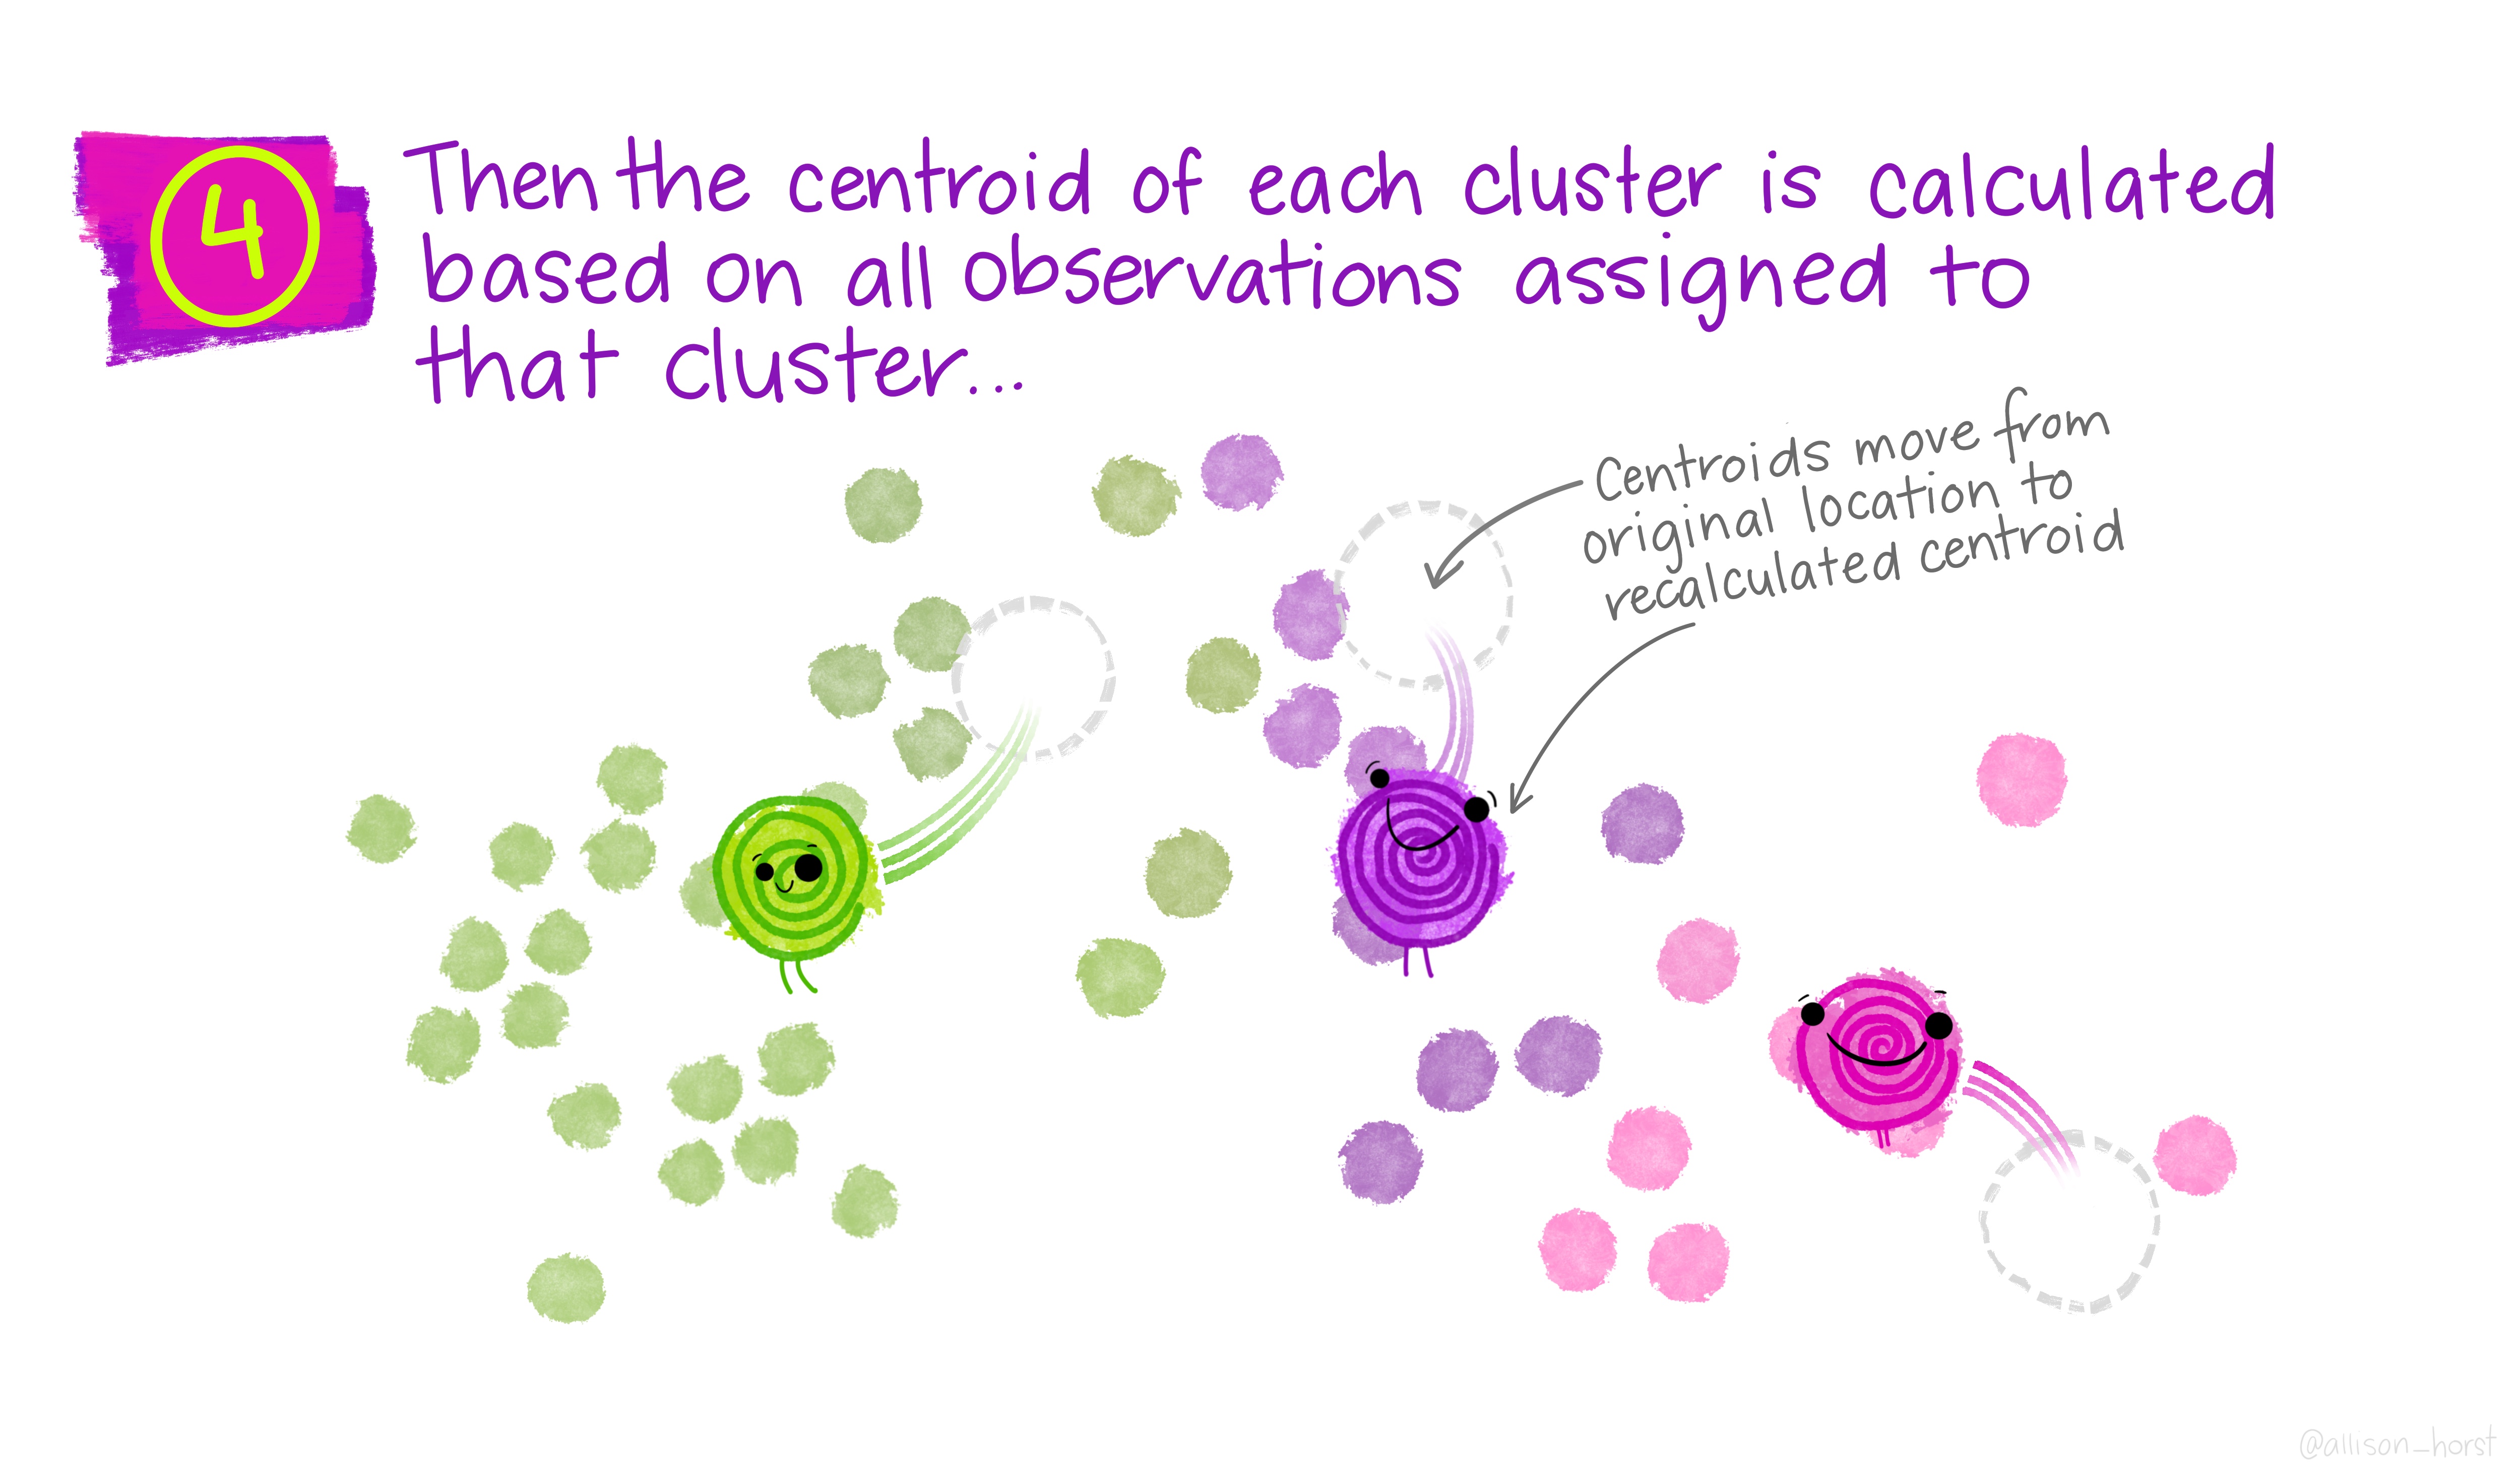 Monsters as cluster centers moving around throughout the k-means algorithm.